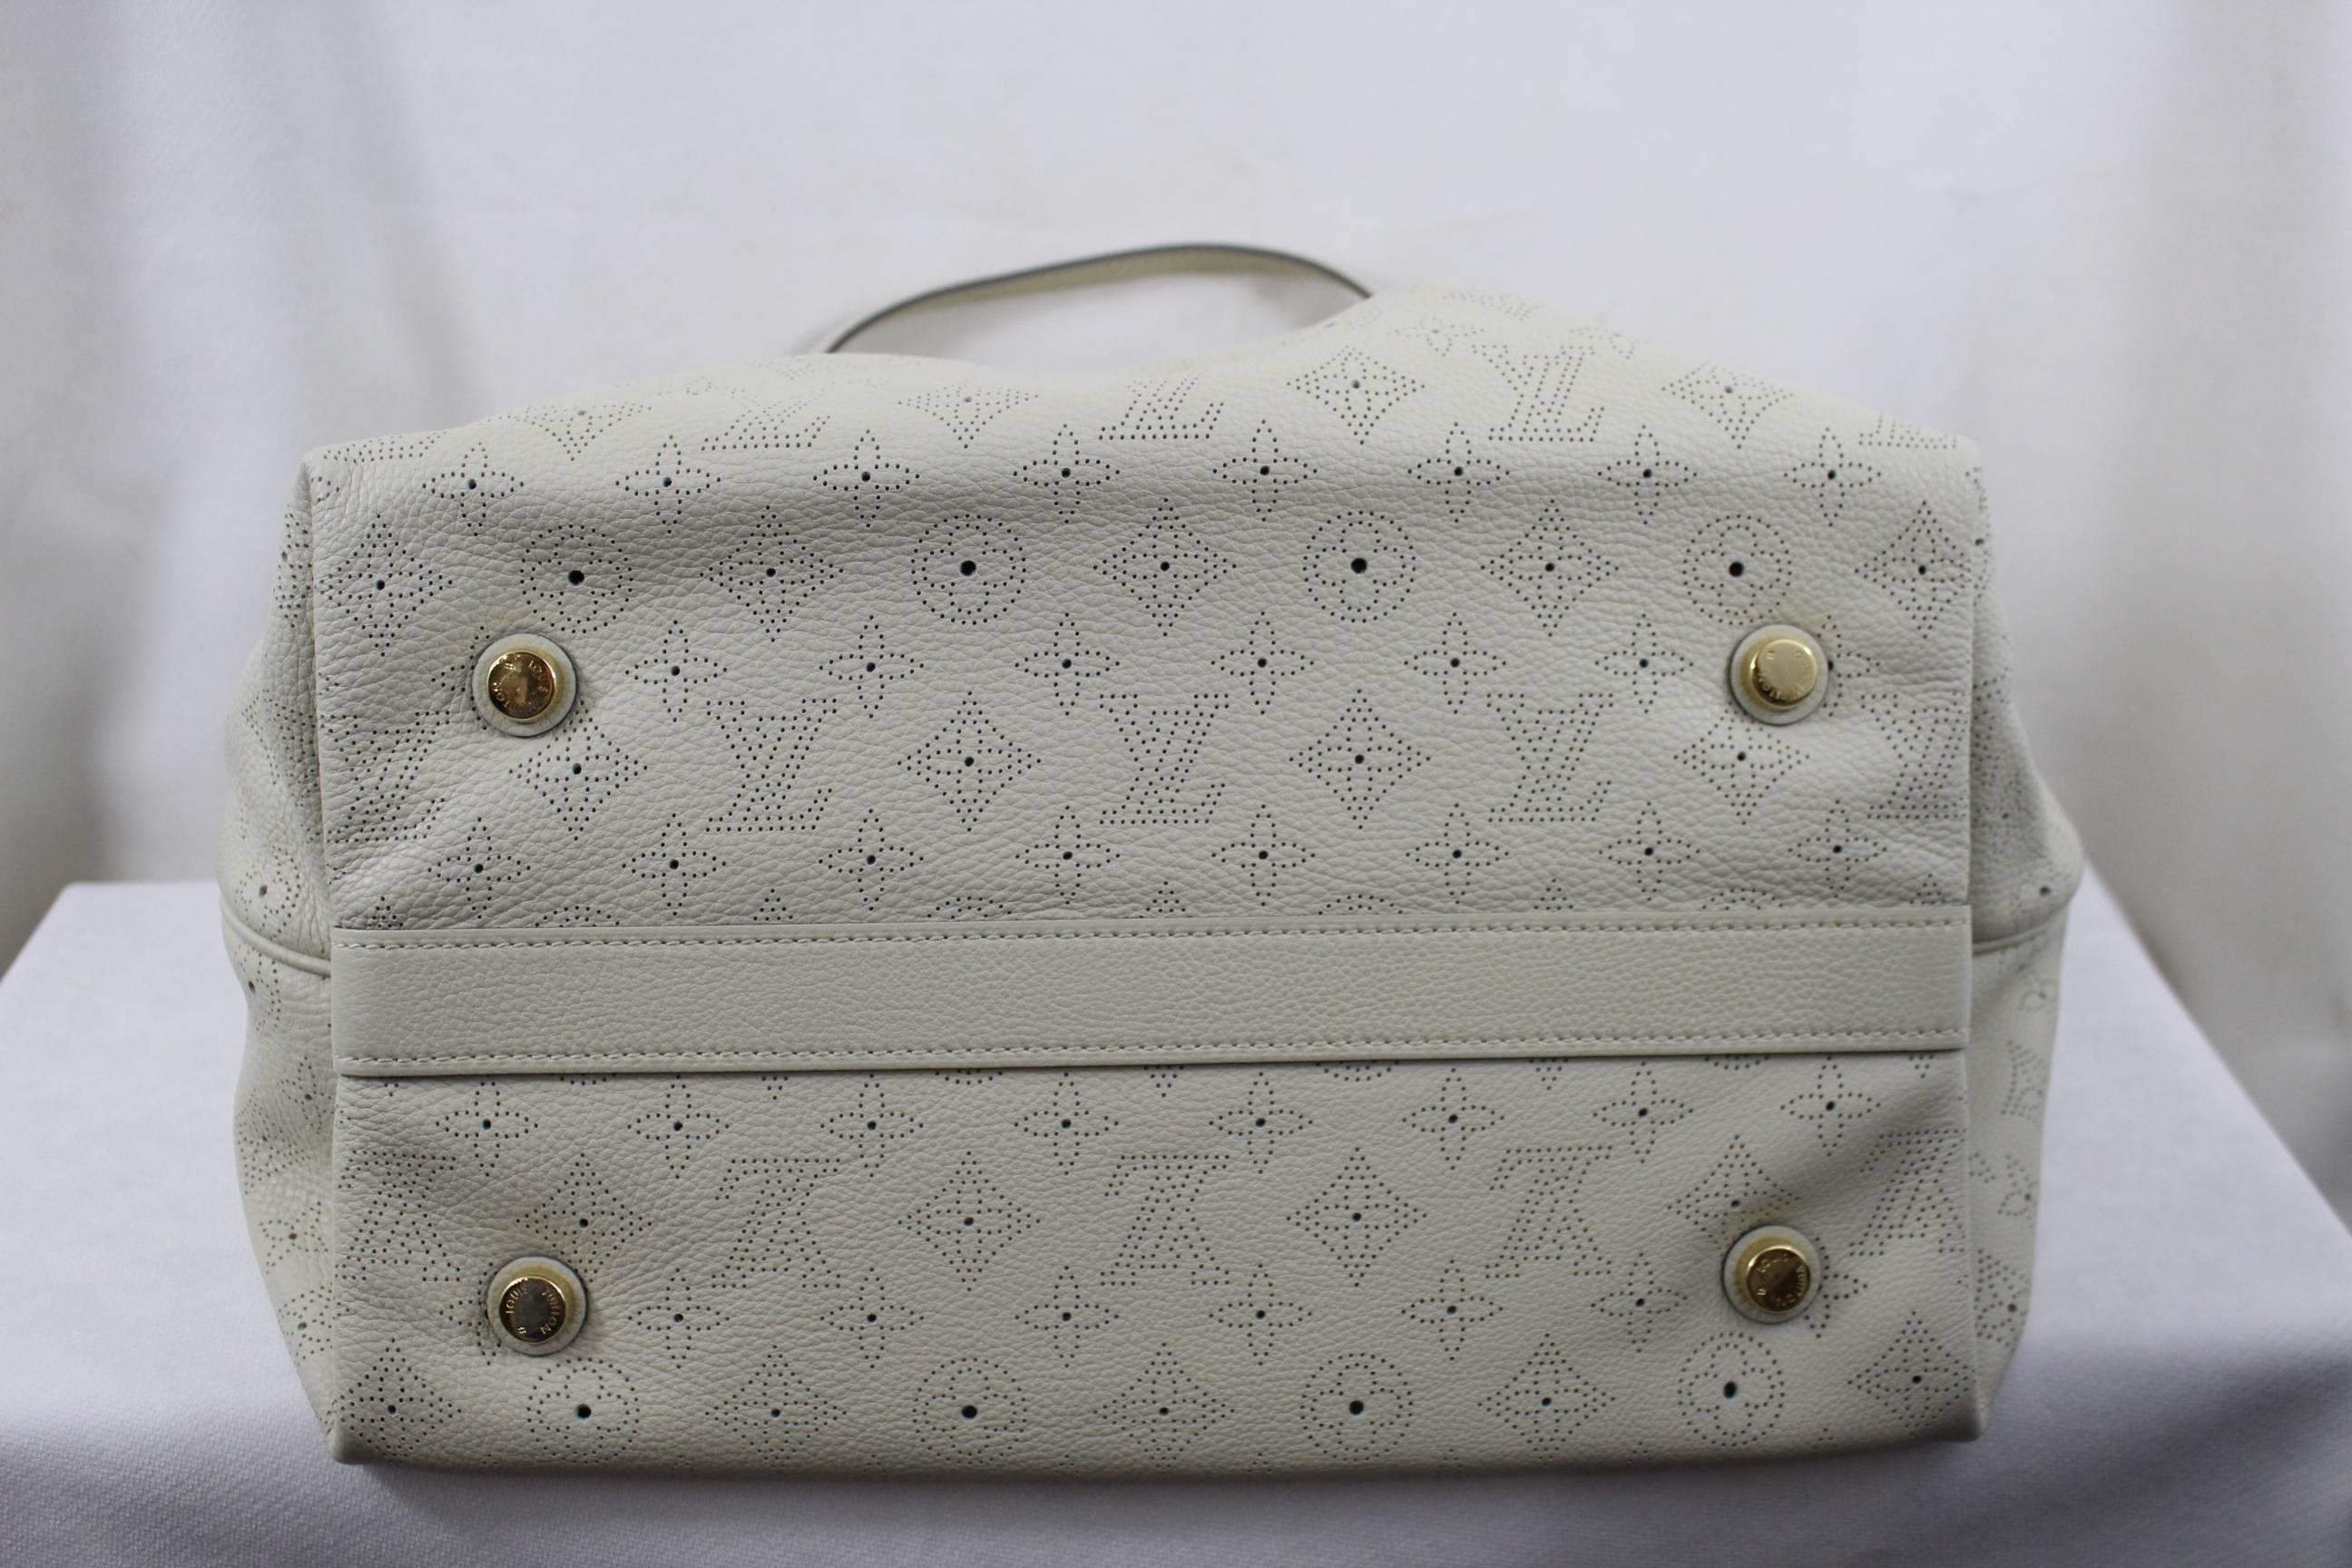 Really nce handbag from Louis Vuitton with Mahina perforated leather

Excelllent condition, just some really slight signs of use in the interioer (almost not perceptible)
Outside: almost 10 over 10

Size 35 X 20 X 24 centimeters